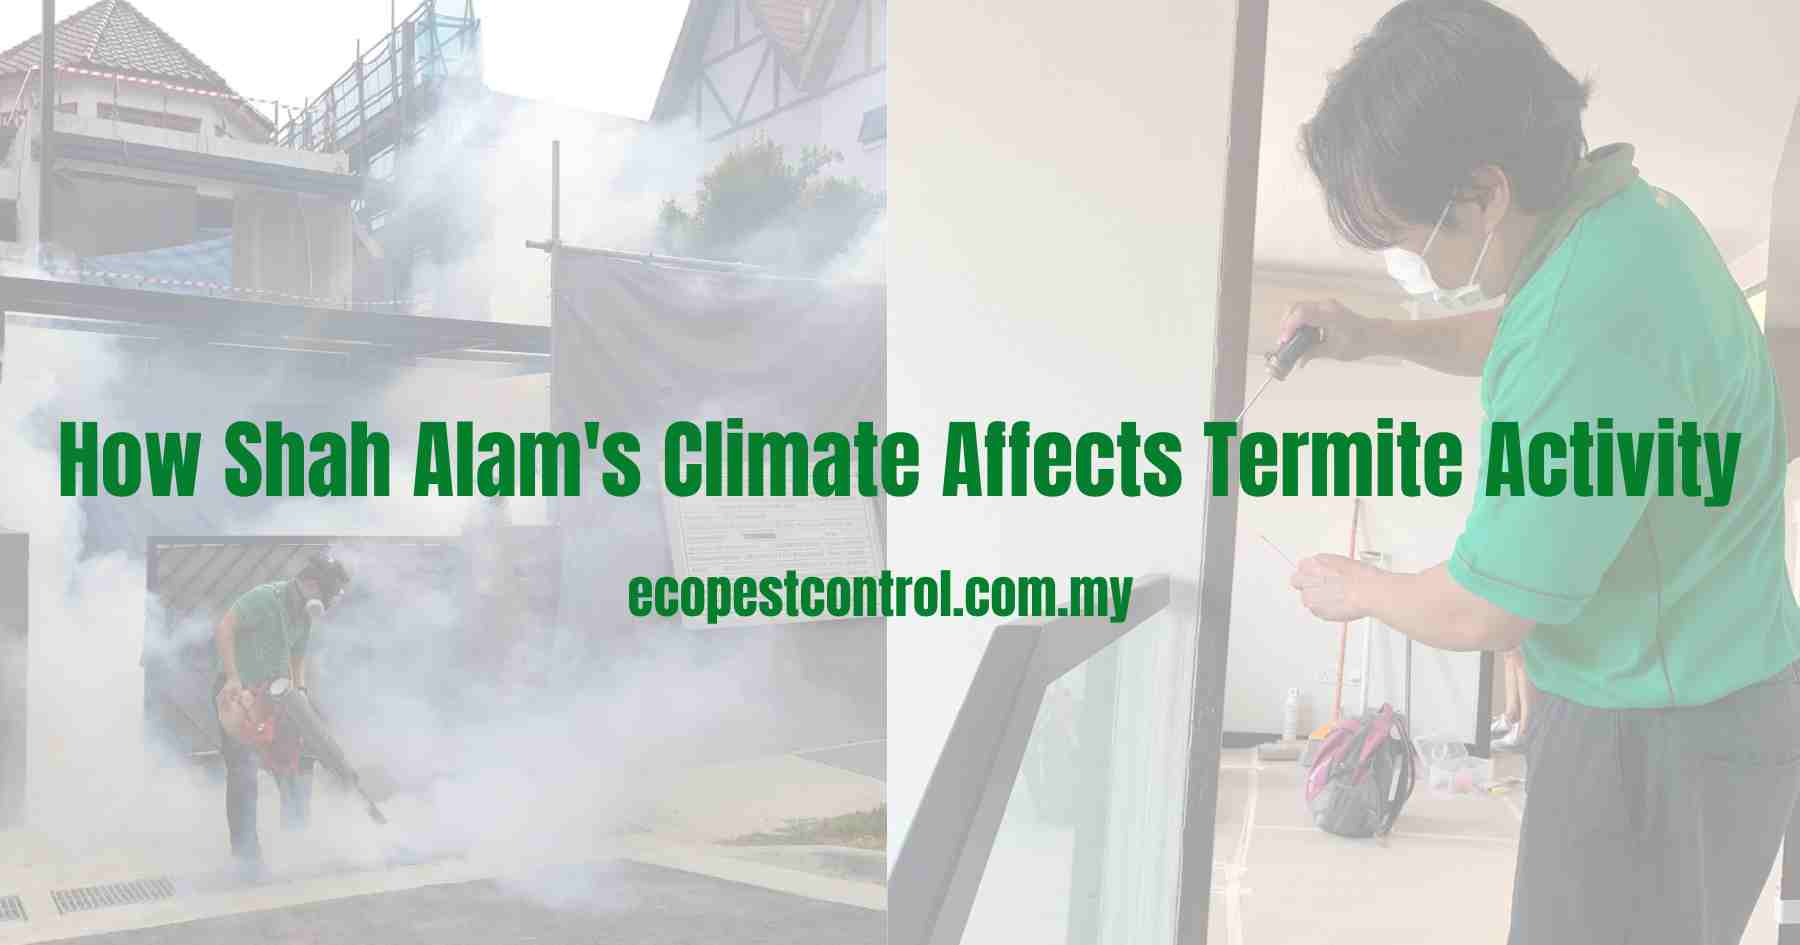 How Shah Alam's Climate Affects Termite Activity